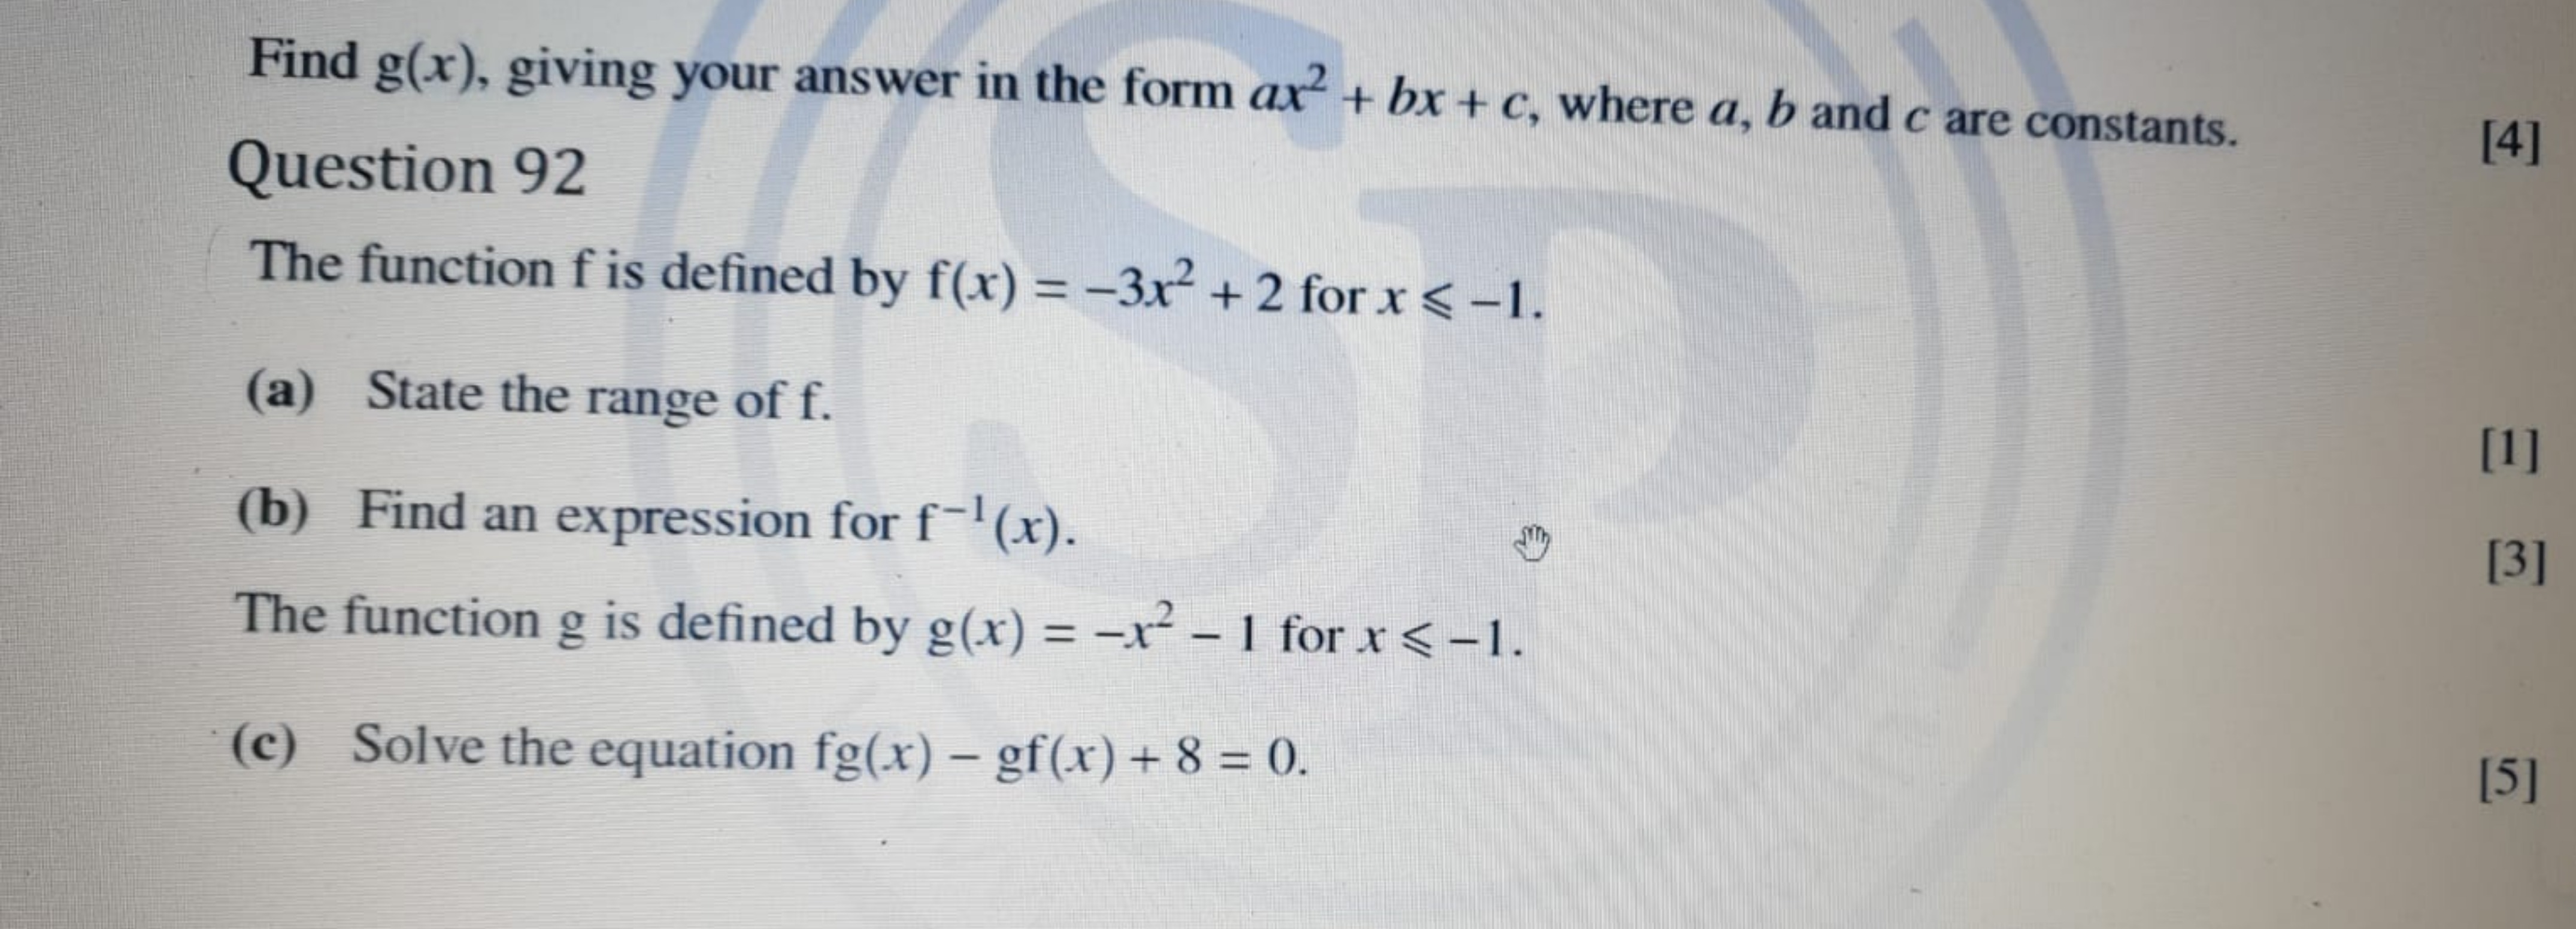 Find g(x), giving your answer in the form ax2+bx+c, where a,b and c ar